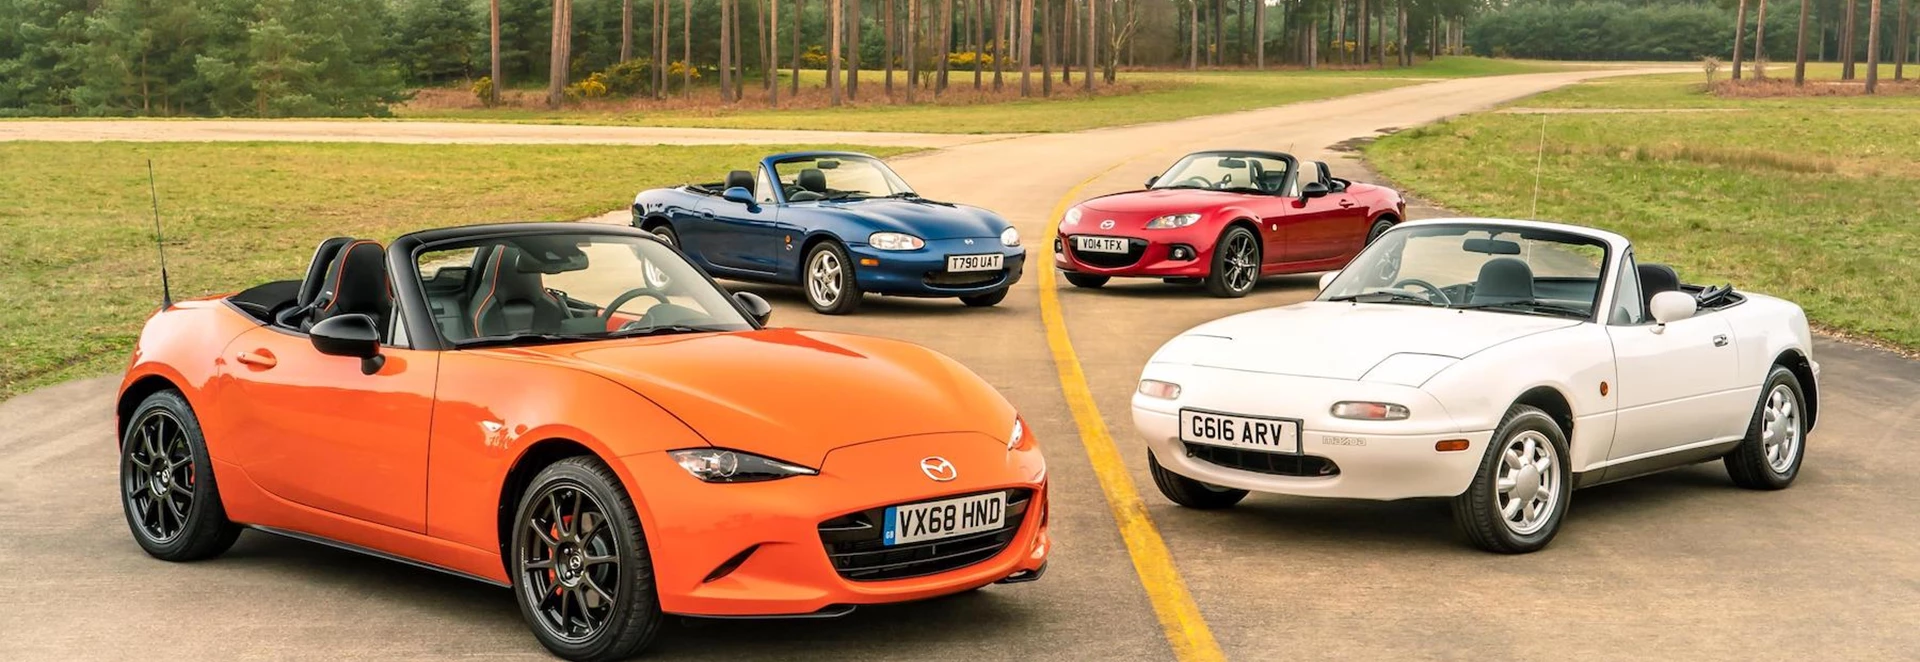 Through the generations: Every Mazda MX-5 driven